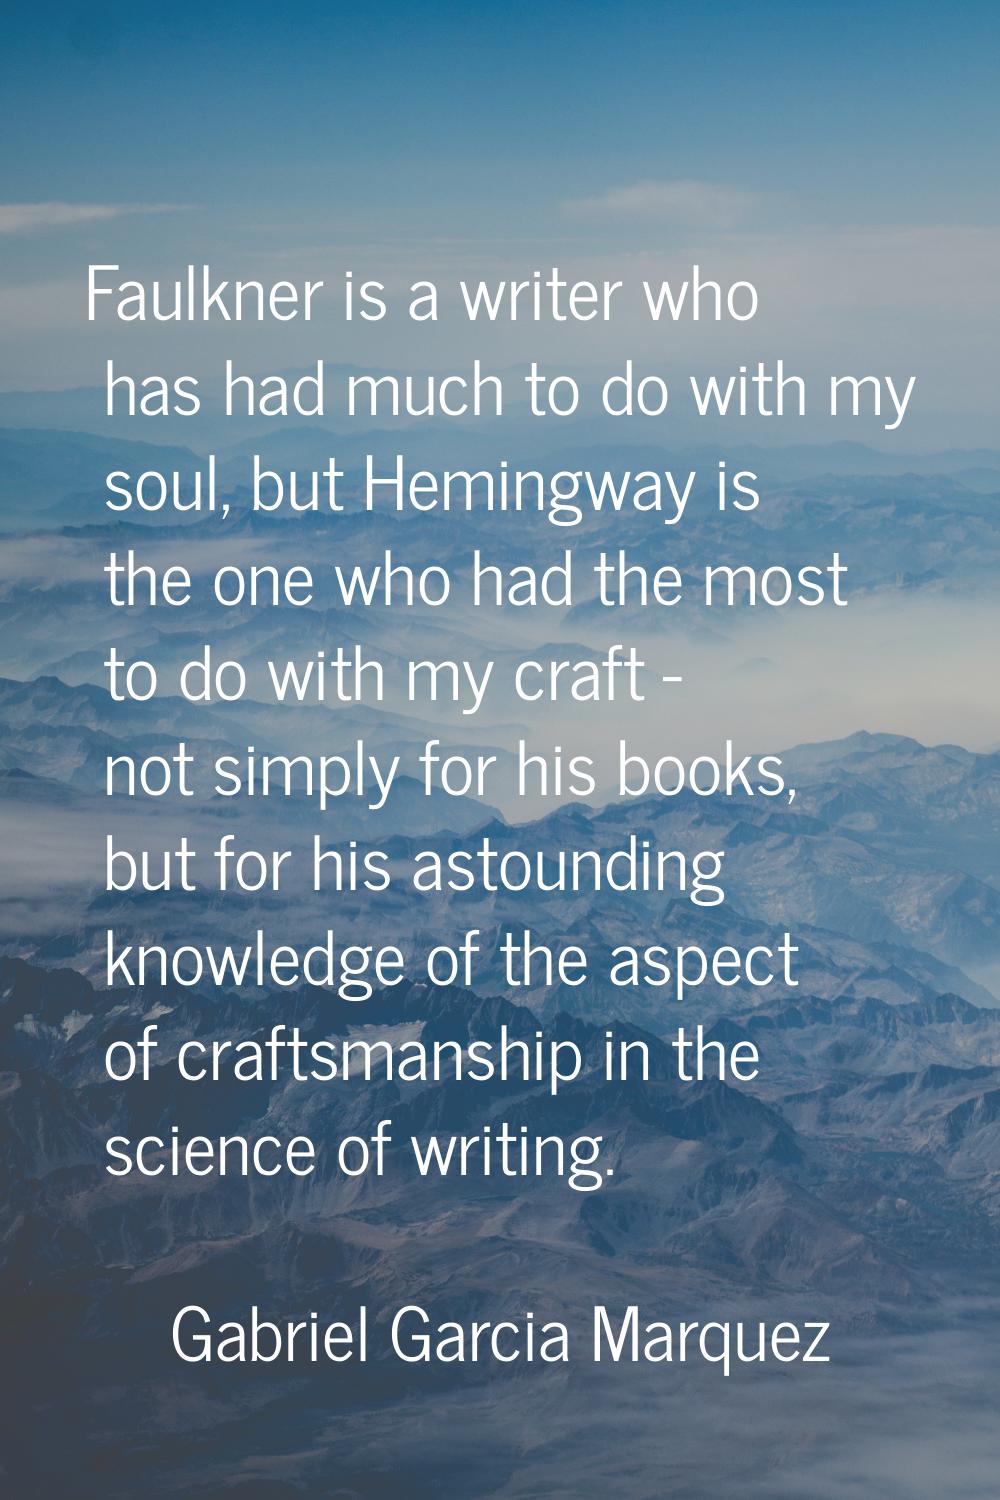 Faulkner is a writer who has had much to do with my soul, but Hemingway is the one who had the most